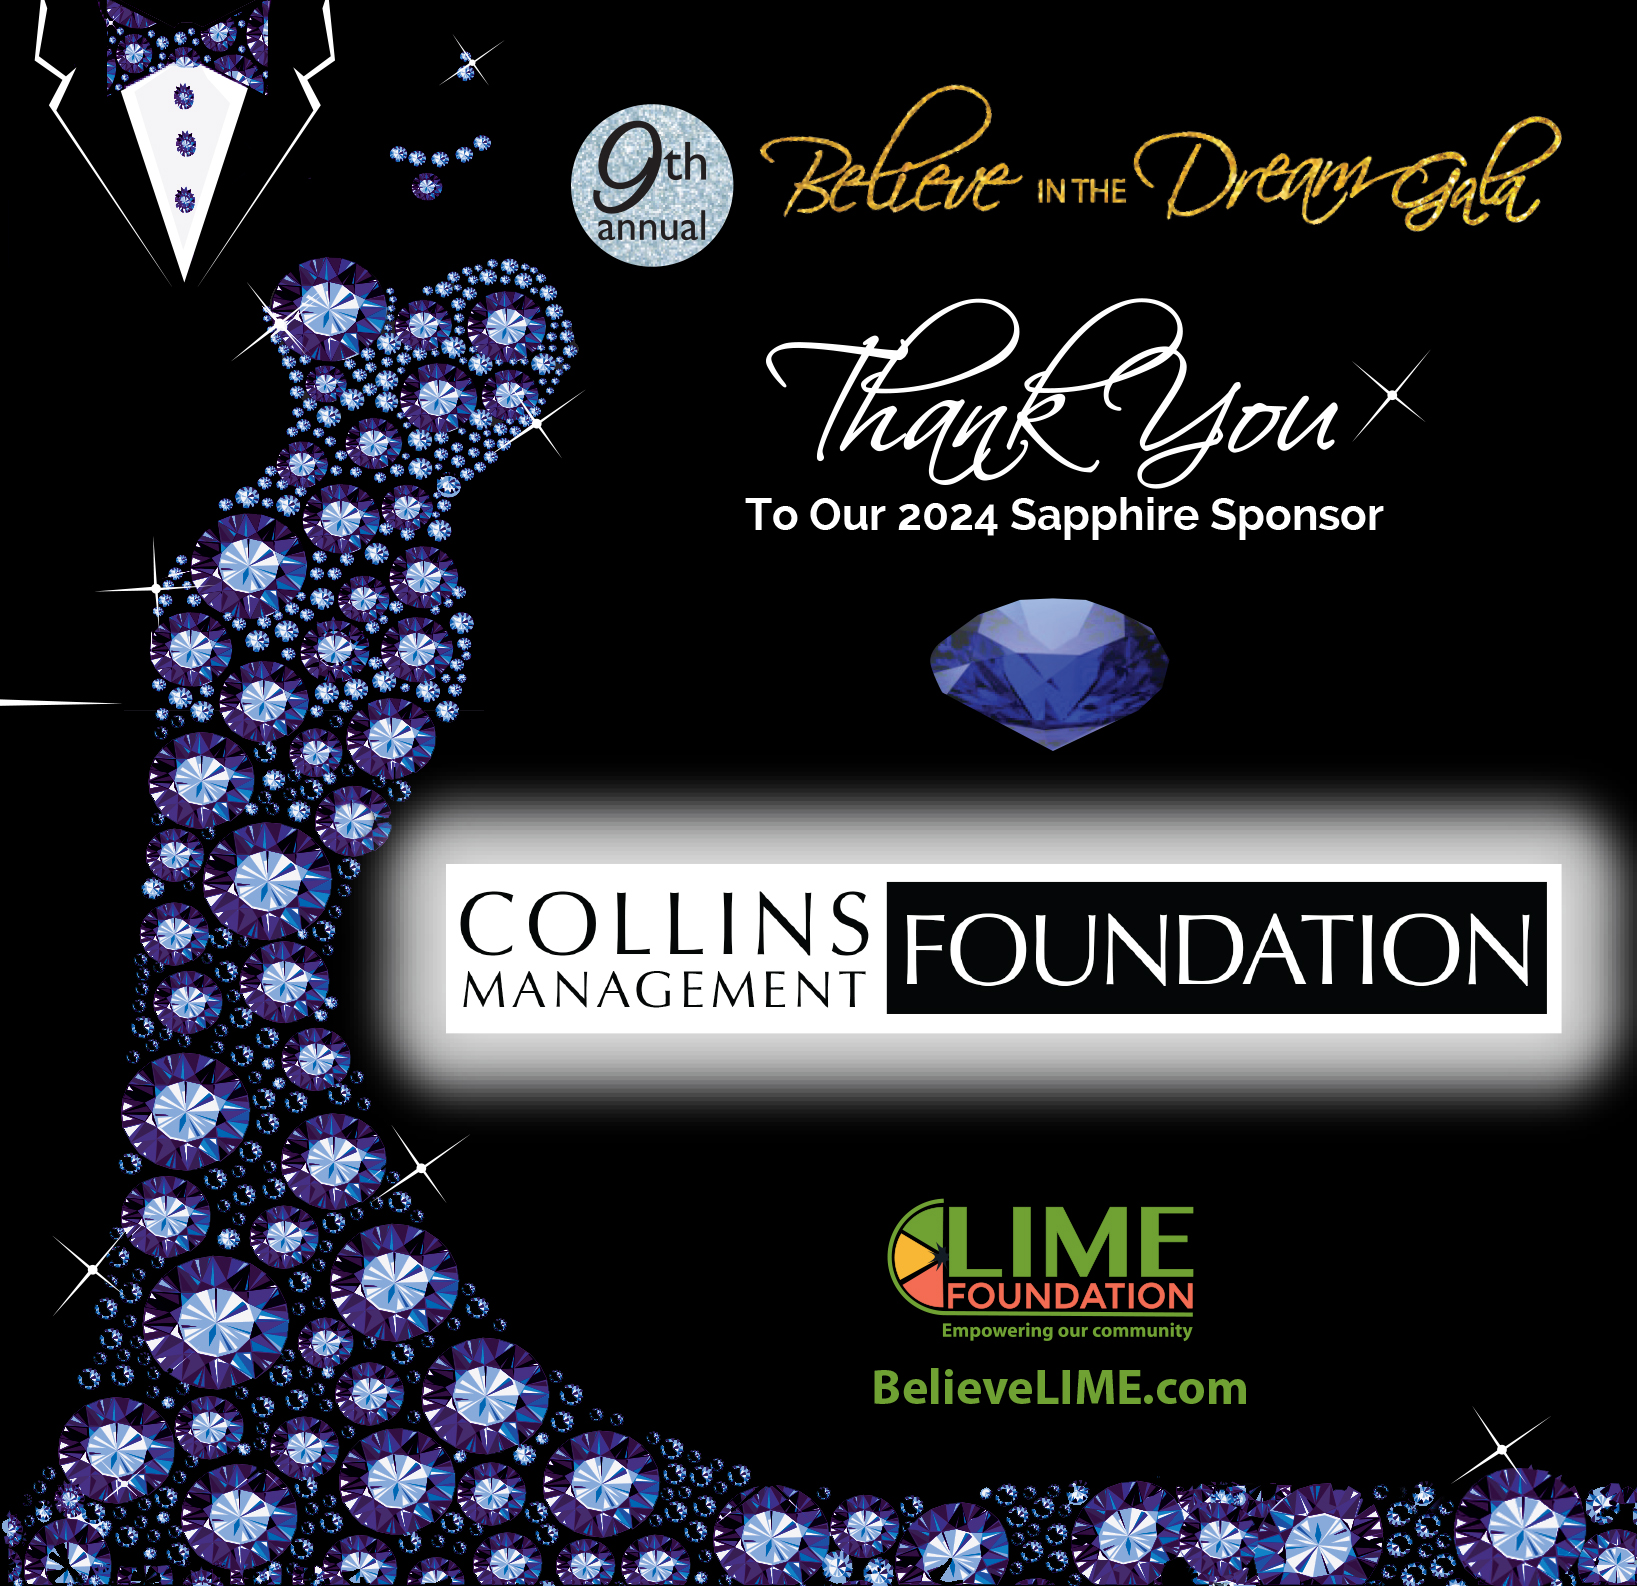 Graphic for a gala event showing a sparkling blue dress design with text thanking the sapphire sponsor, Collins Foundation, for the 9th annual Believe The Dream Gala 2024.